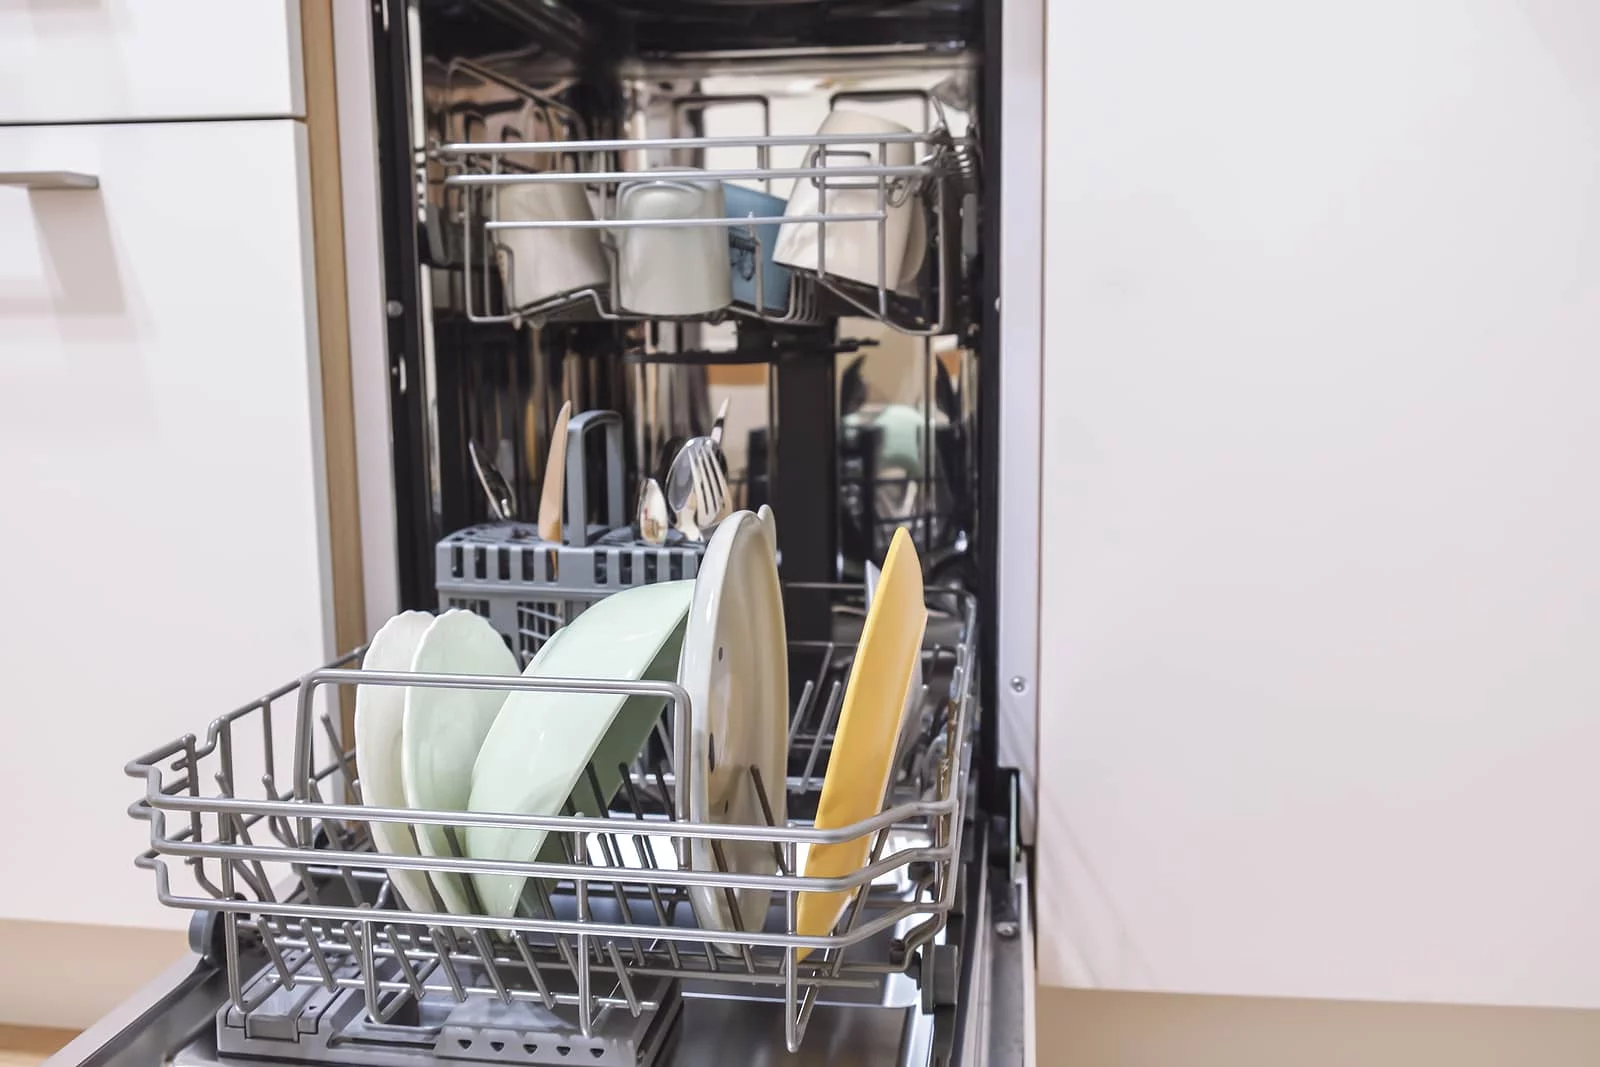 Does Home Insurance Cover Water Damage from Dishwasher